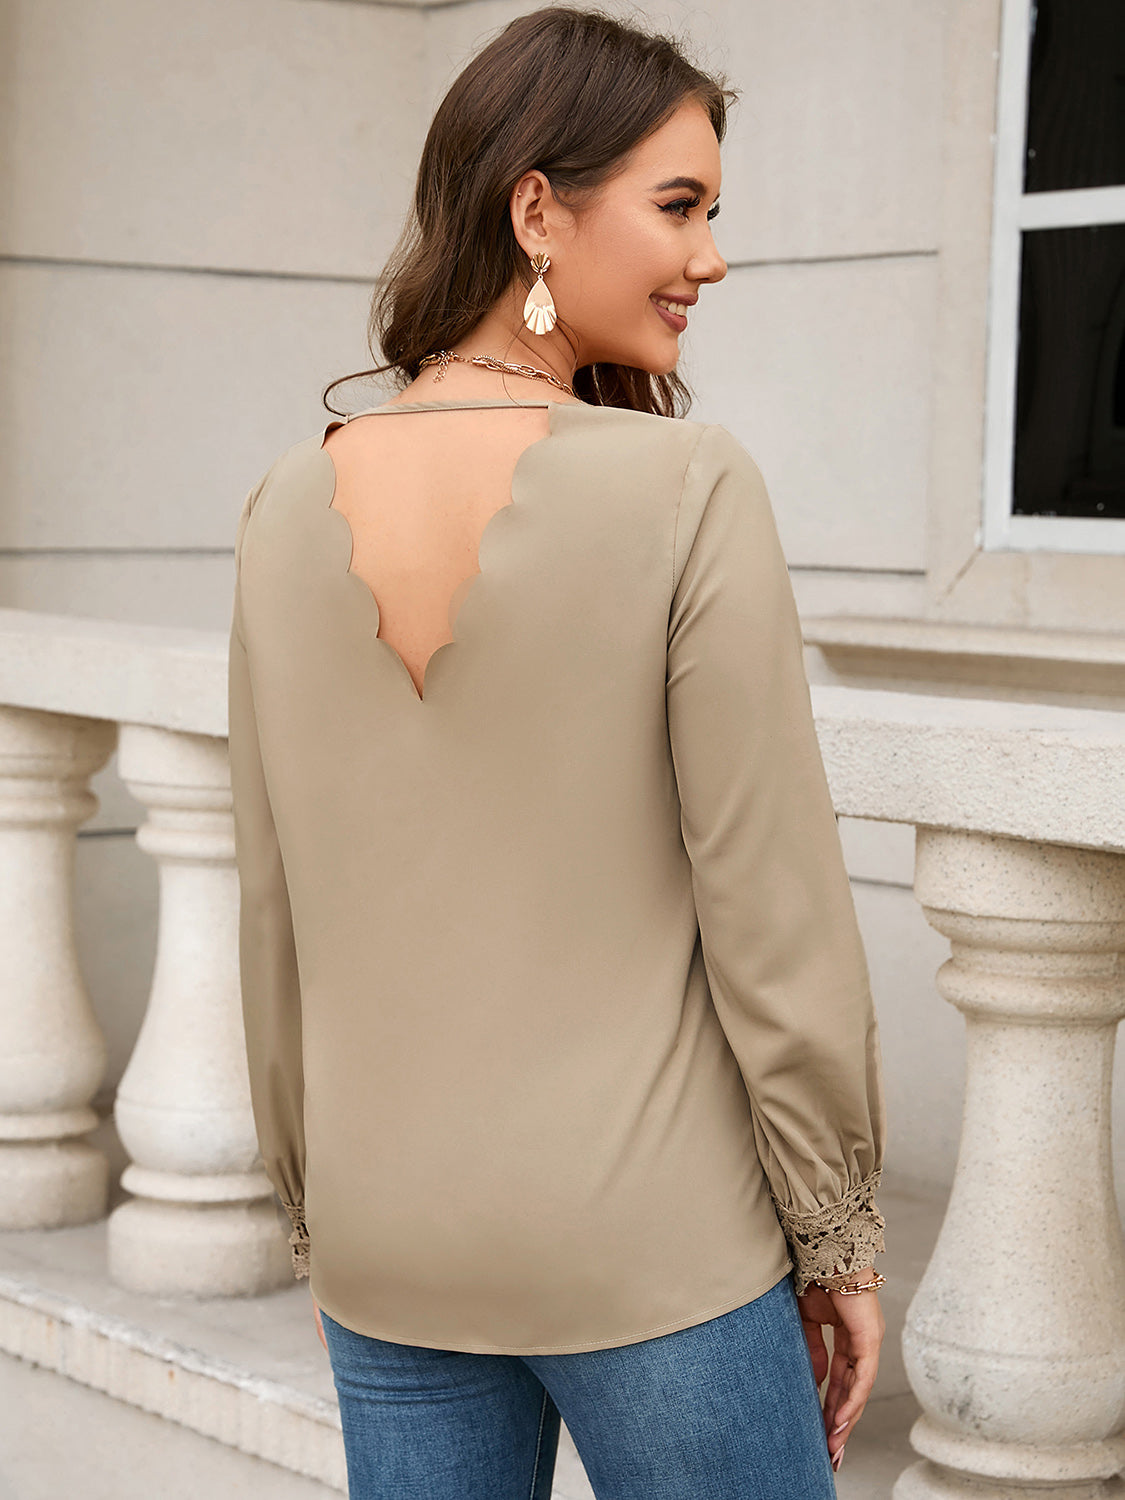 V-Neck Long Sleeve Blouse - Women’s Clothing & Accessories - Shirts & Tops - 2 - 2024